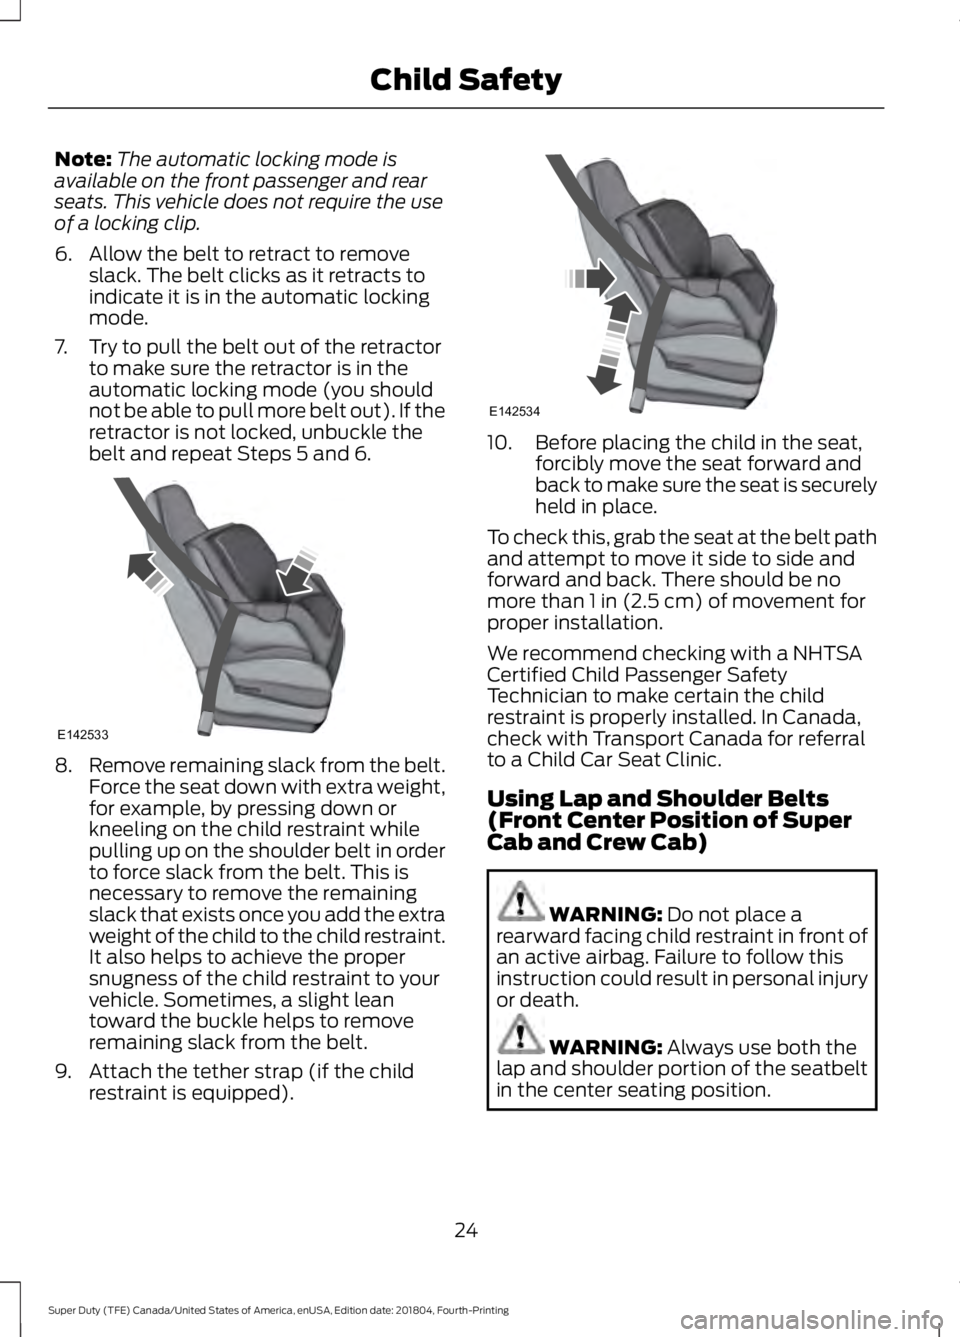 FORD F450 SUPER DUTY 2019  Owners Manual Note:
The automatic locking mode is
available on the front passenger and rear
seats. This vehicle does not require the use
of a locking clip.
6. Allow the belt to retract to remove slack. The belt cli